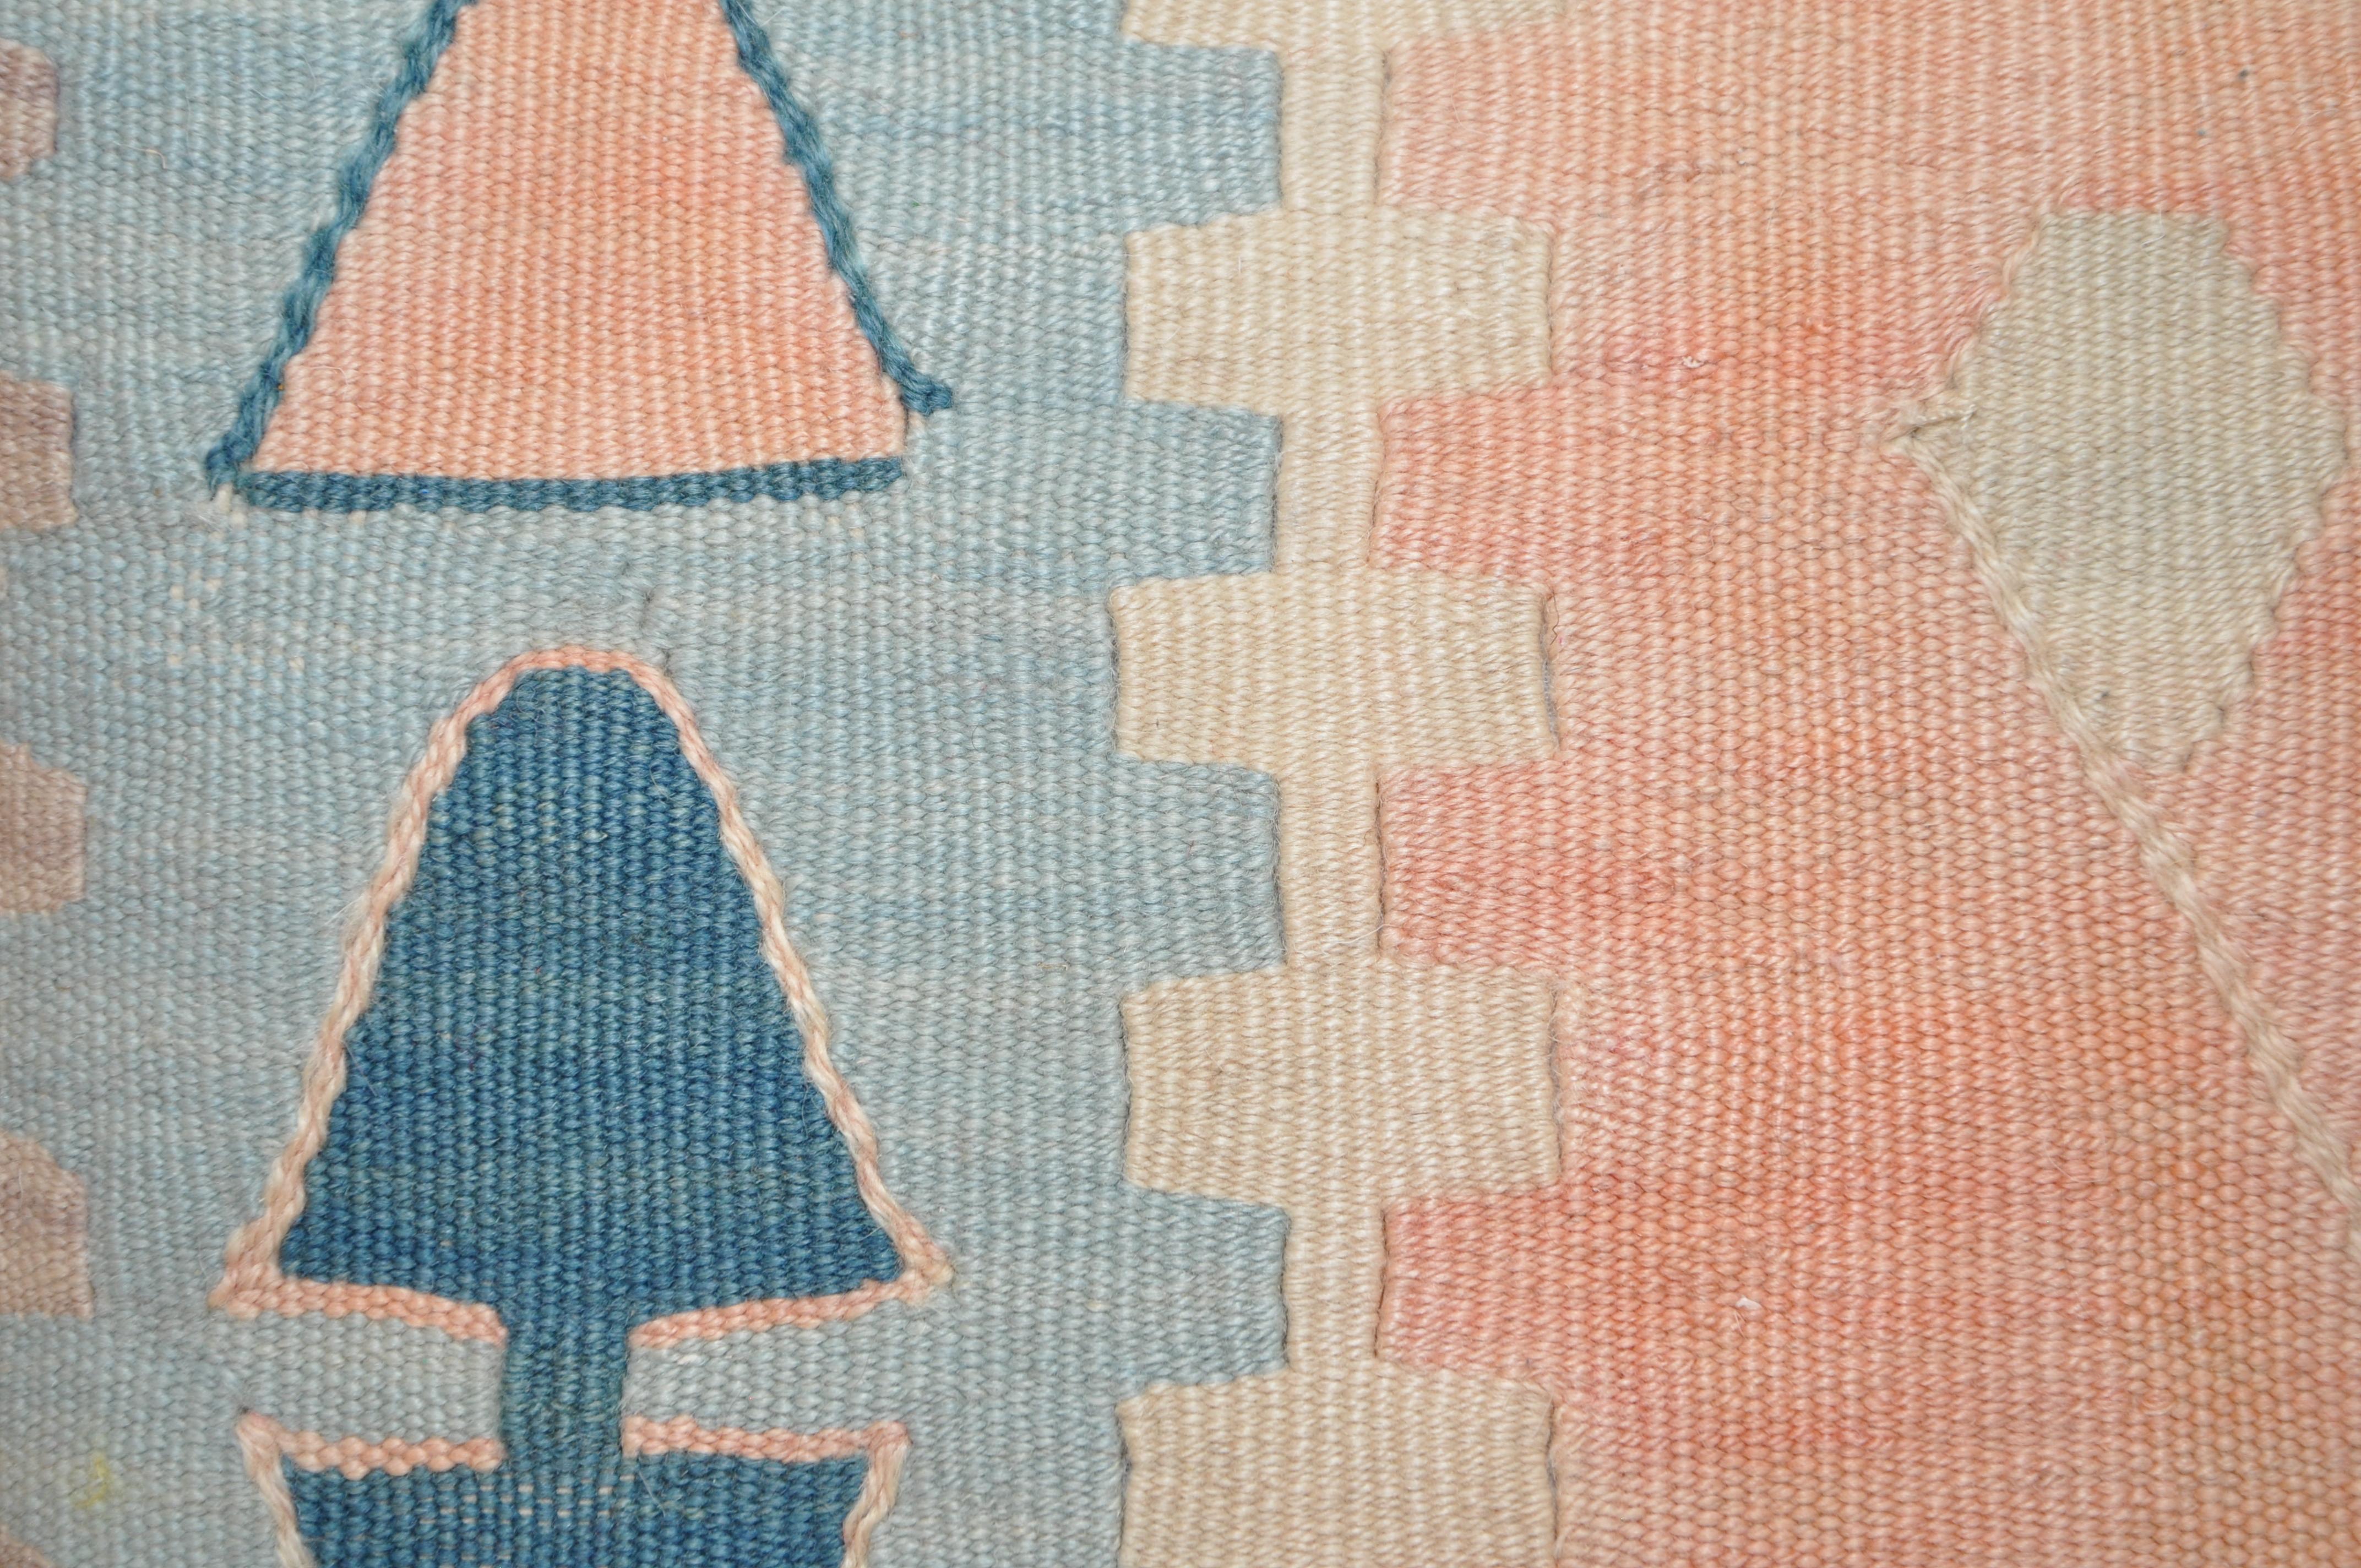 Pair of luxury pillows created from exquisite pieces of vintage kilim rug combined with Irish Linen by Irish designer Katie Larmour. Unique and one-of-a-kind. 

In beautiful geometric shapes of soft faded blue and blush pink.

Each cushion is